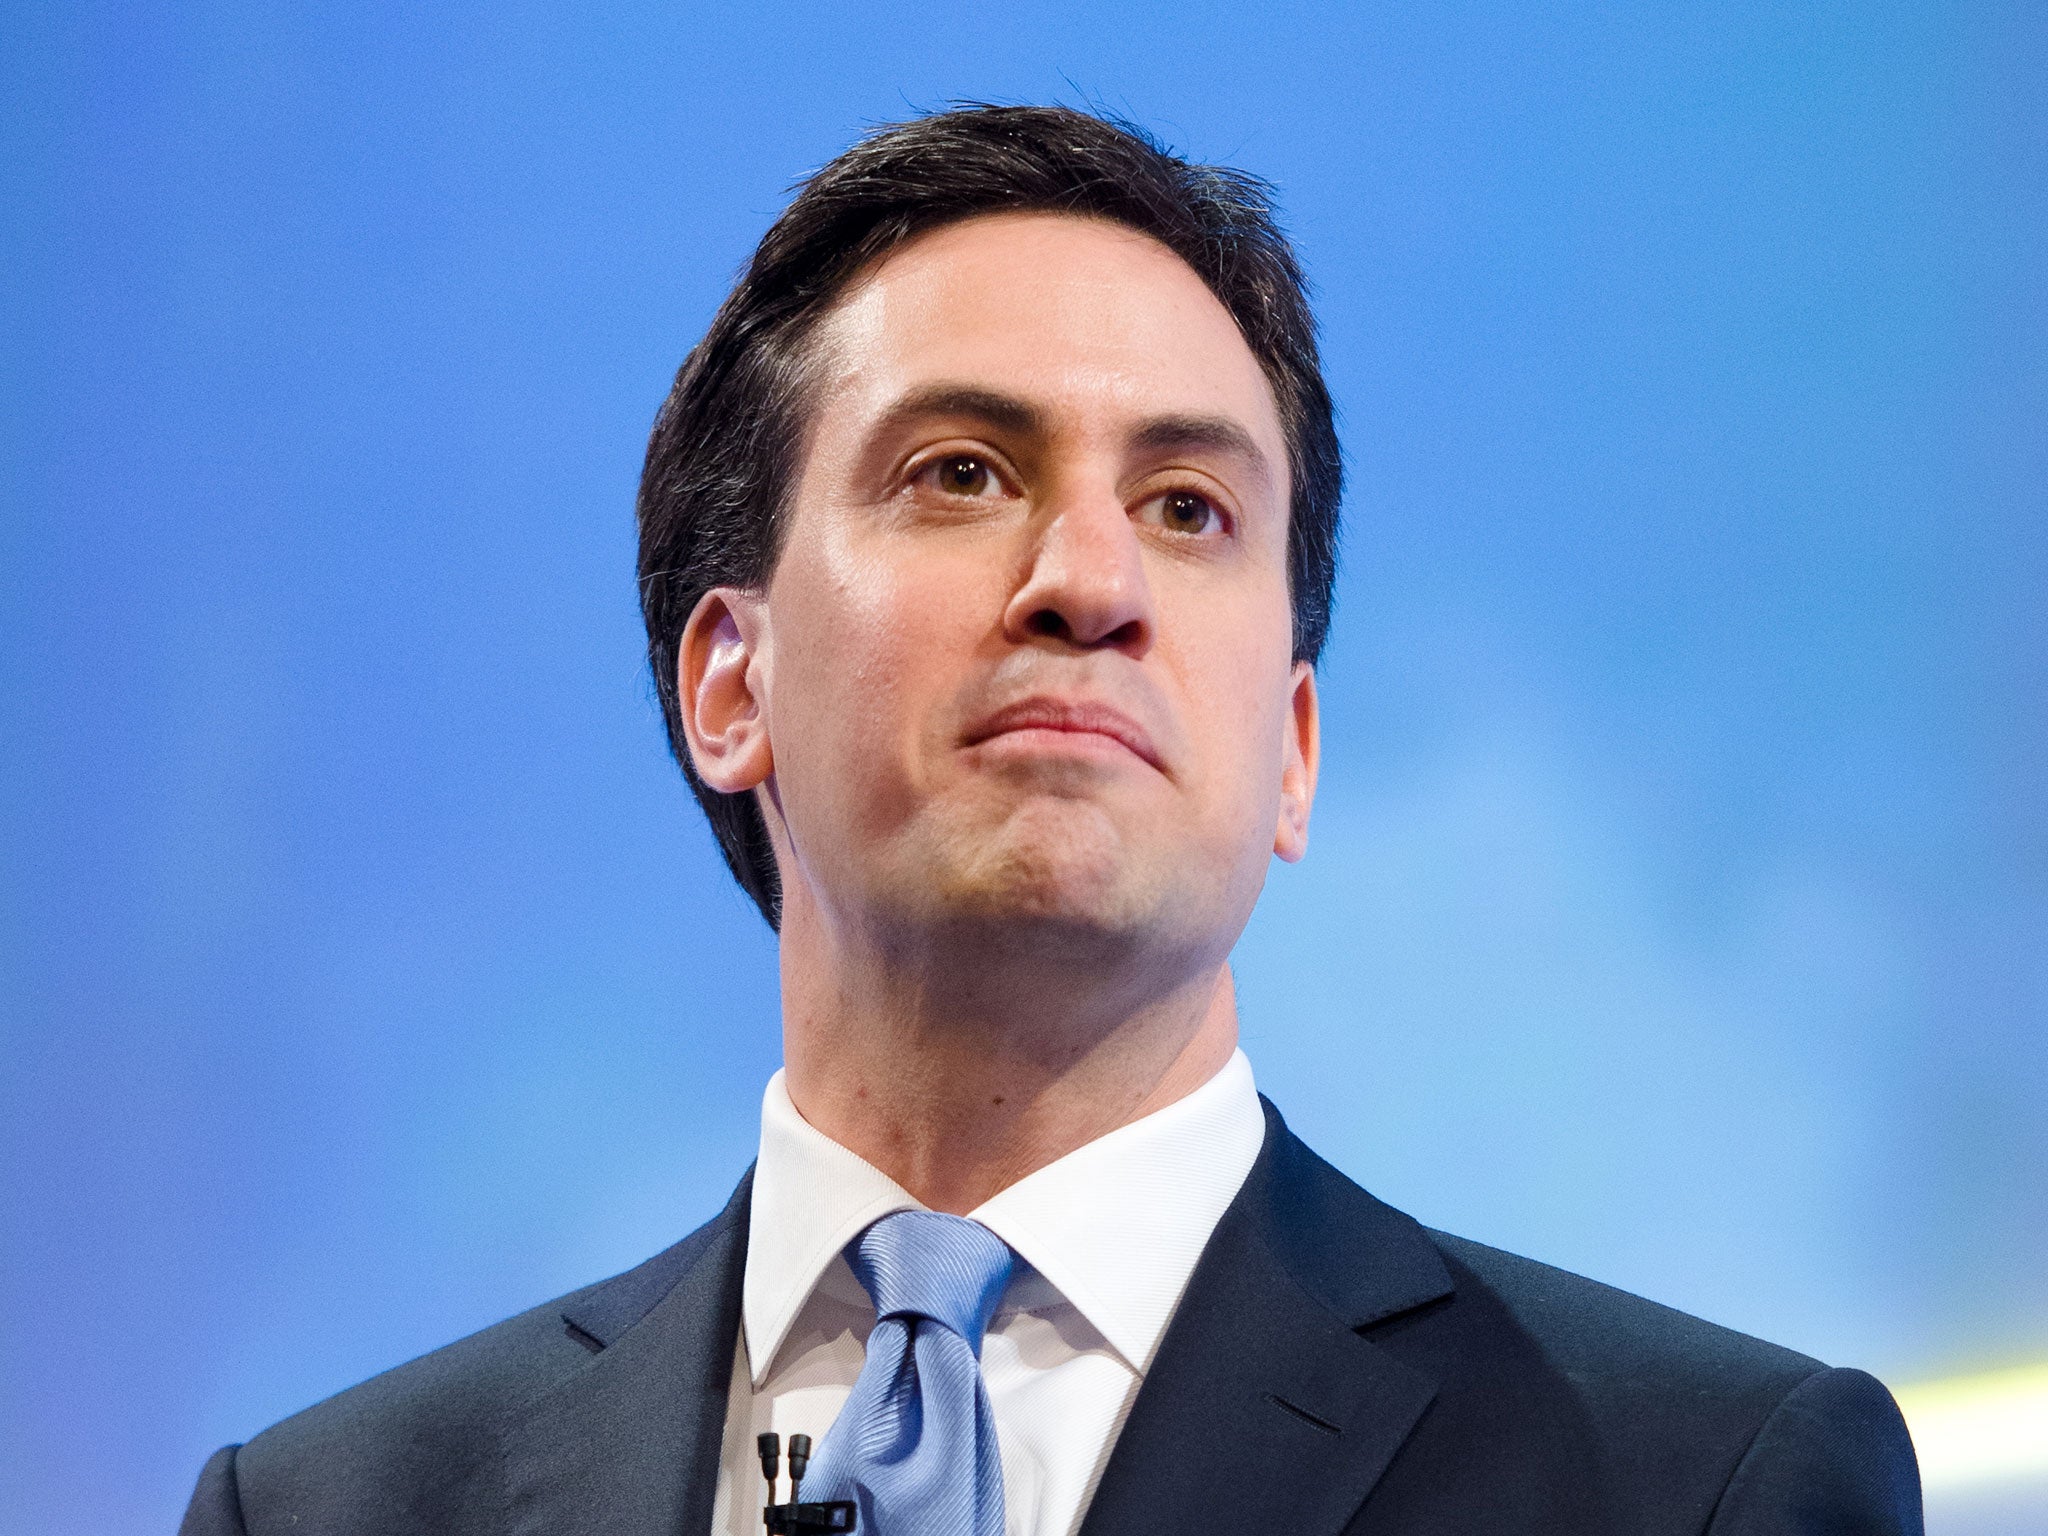 Ed Miliband’s plan to recast Labour’s relationship with the trade unions enjoys strong support among ordinary union members, fuelling claims that their leaders are 'out of touch' for opposing them